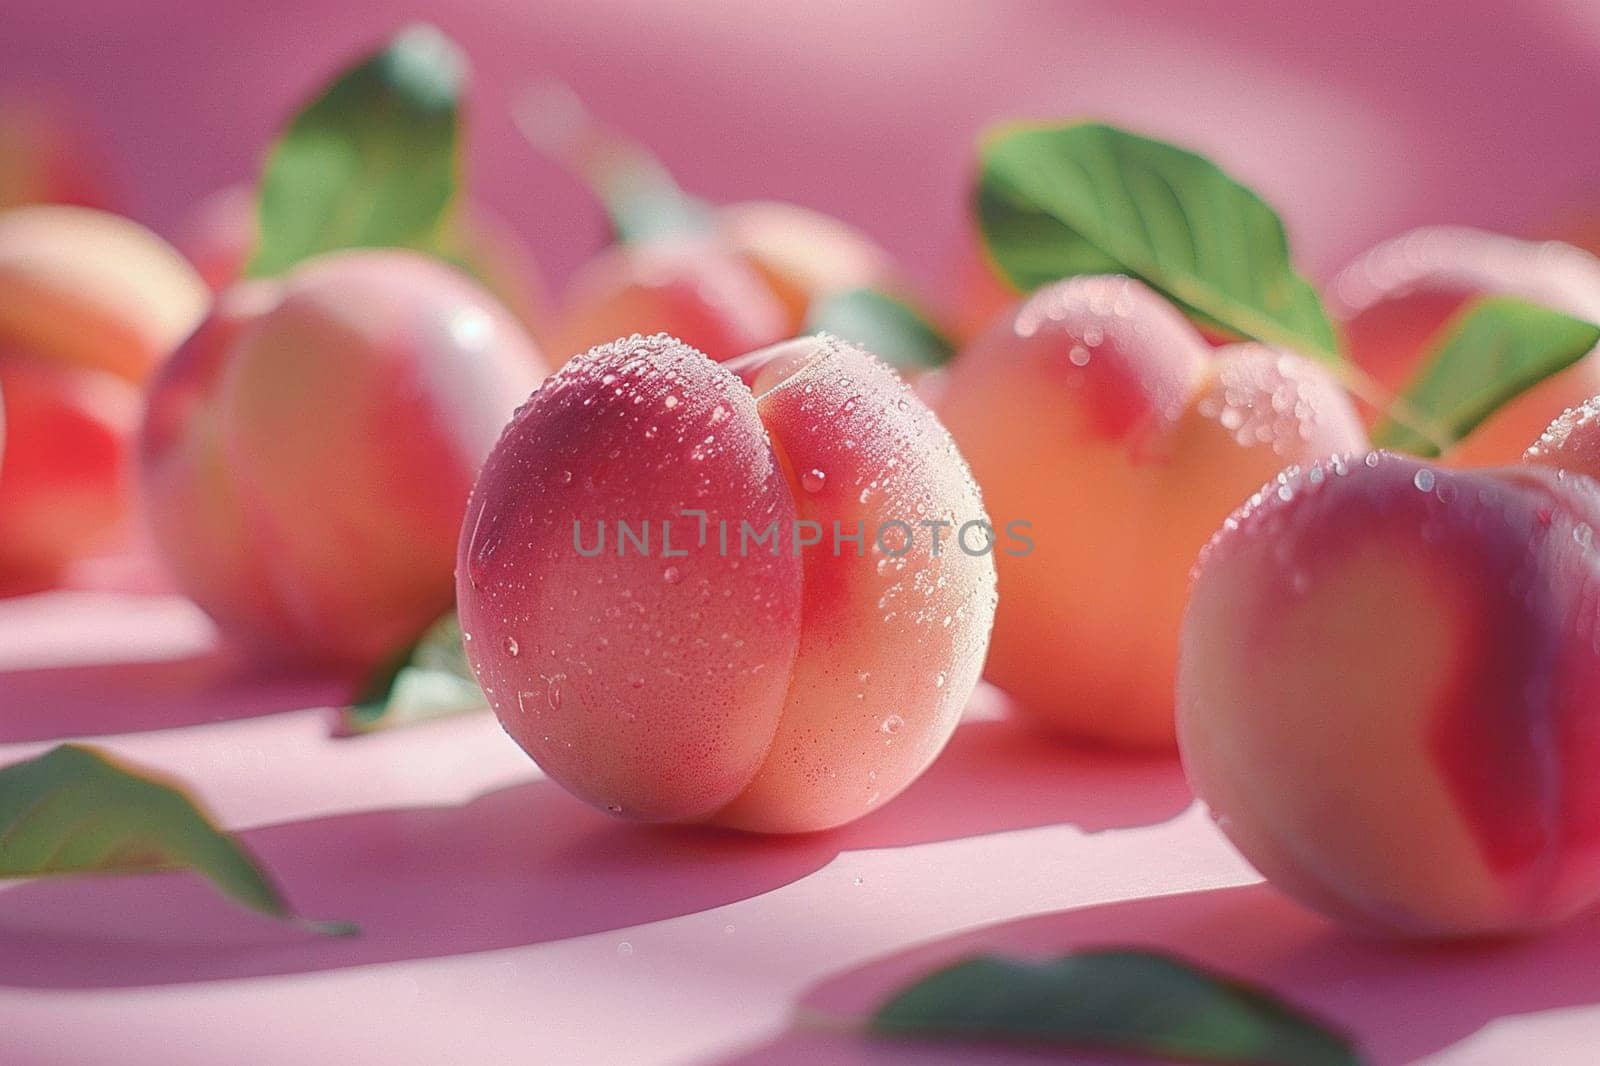 Appetizing ripe peaches in drops of water on a pink background with sunlight.